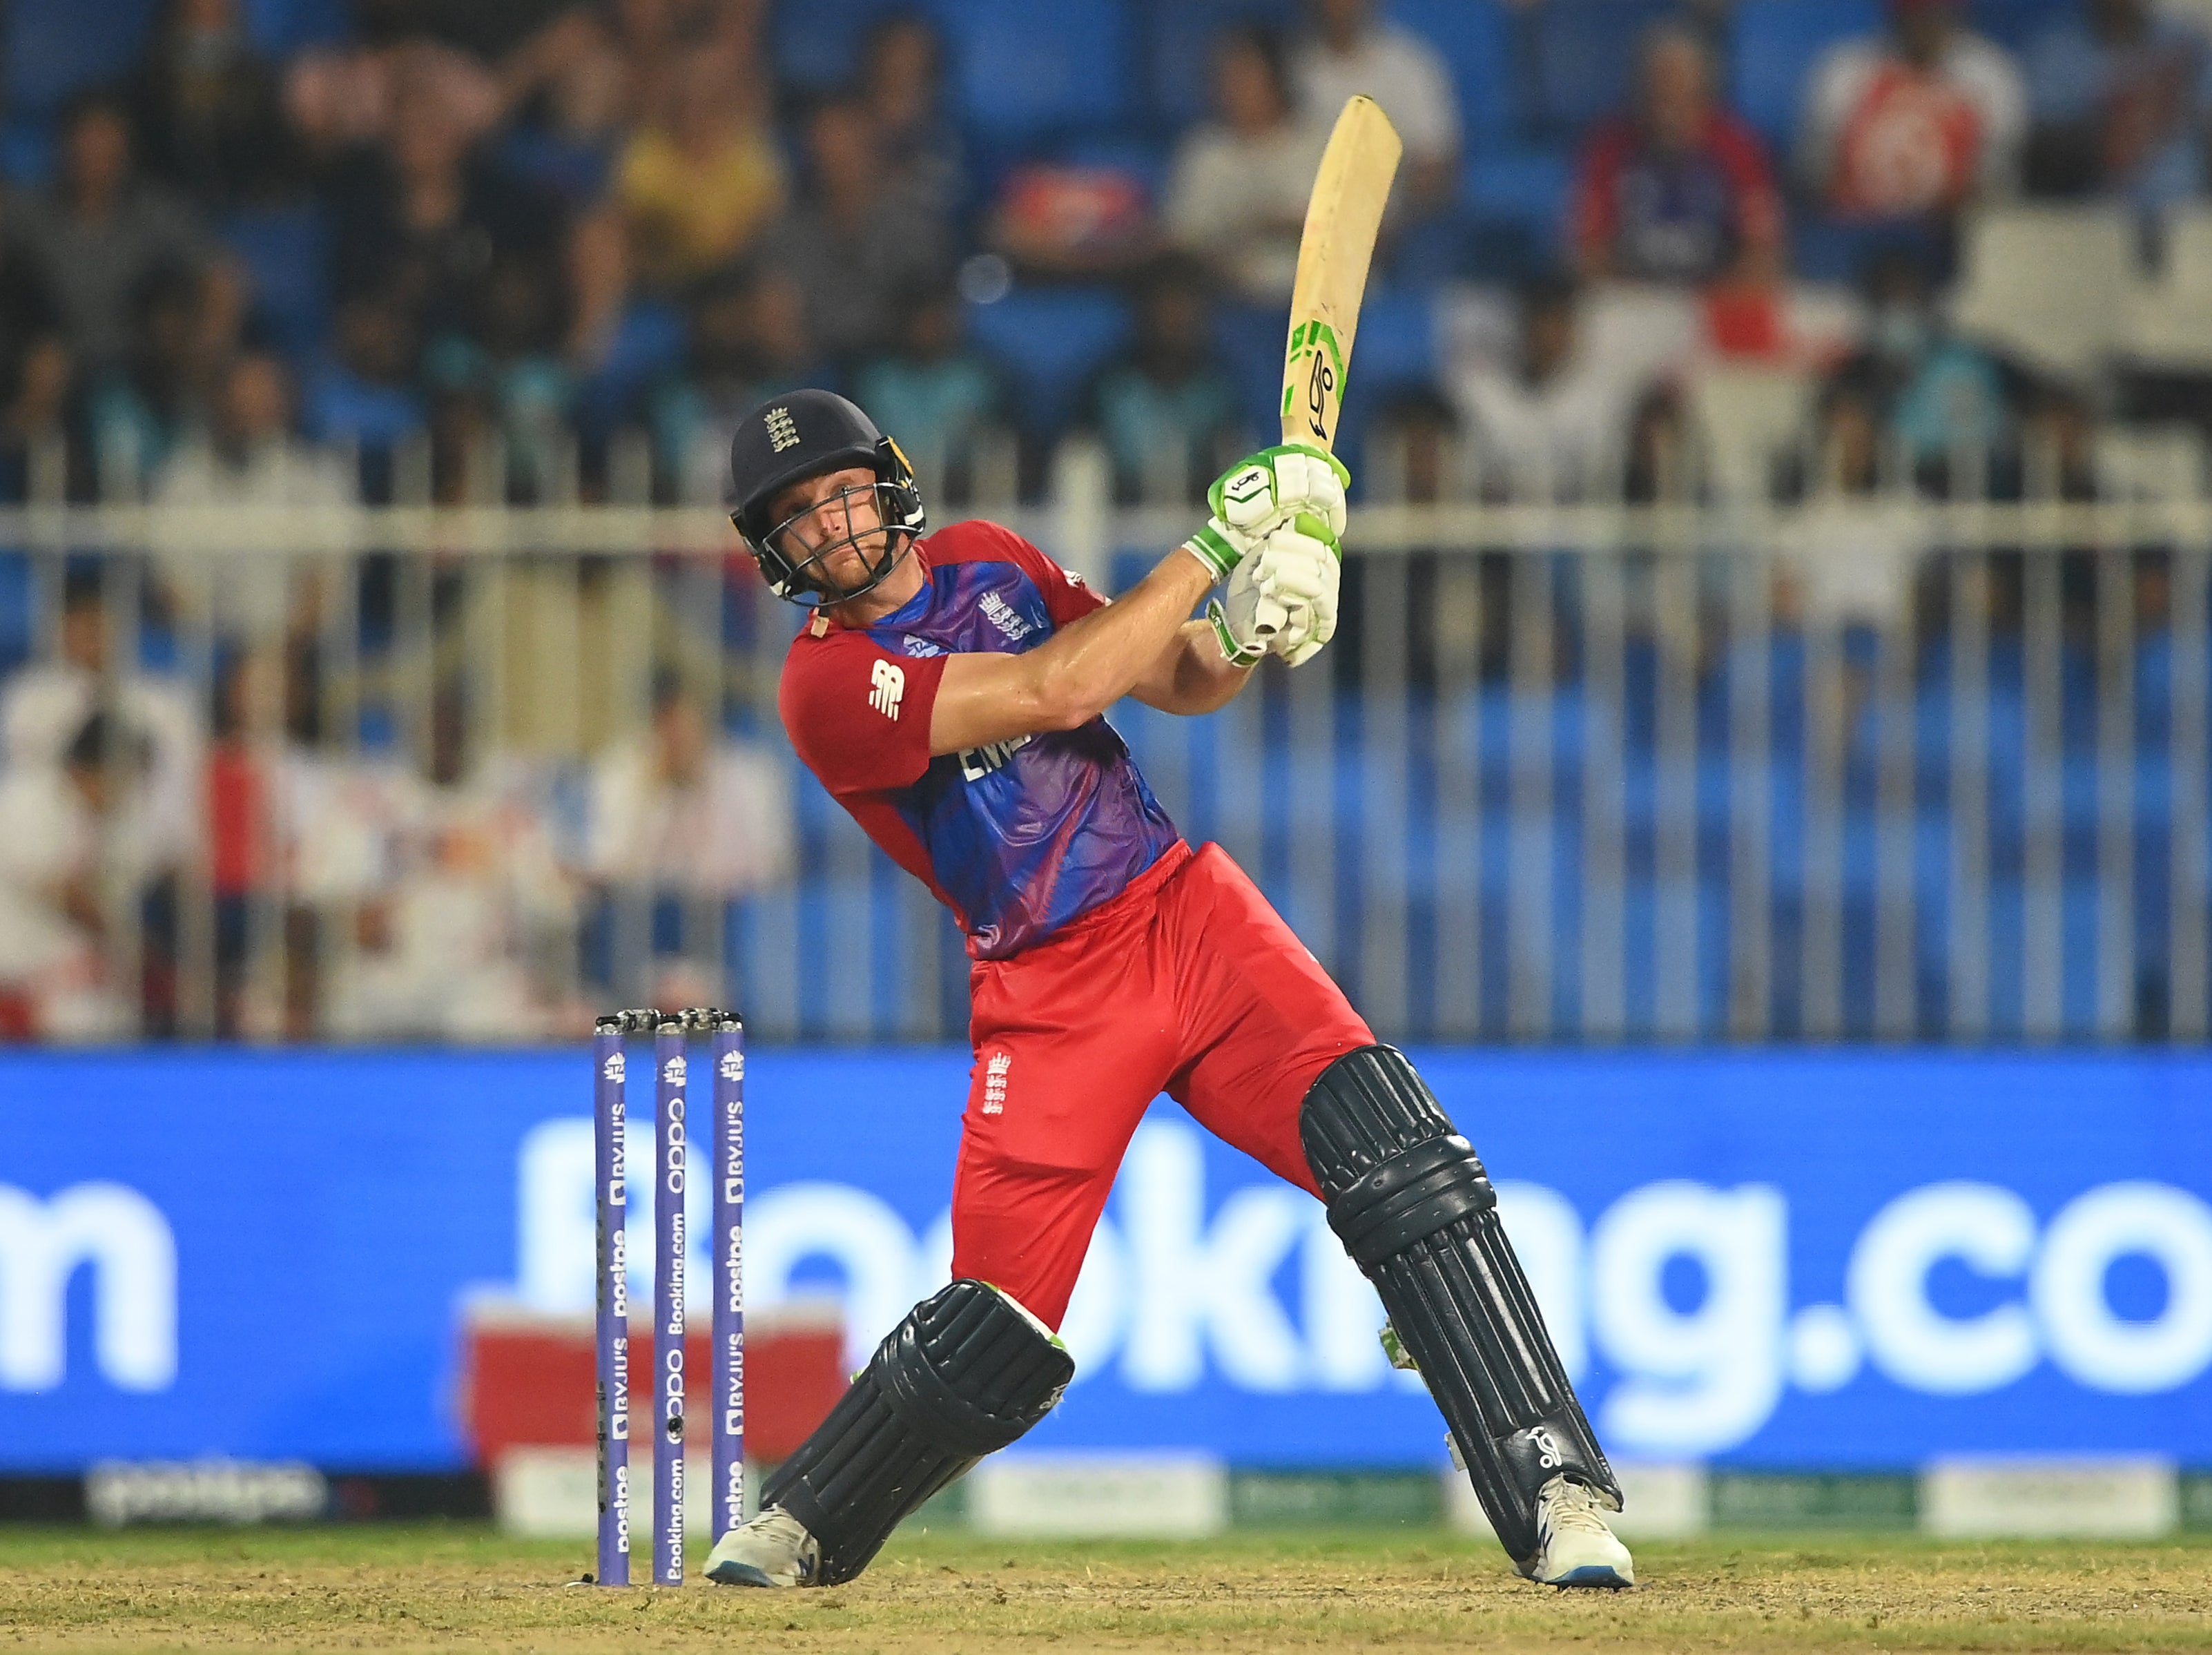 Jos Buttler finished on 101 not out as England beat Sri Lanka